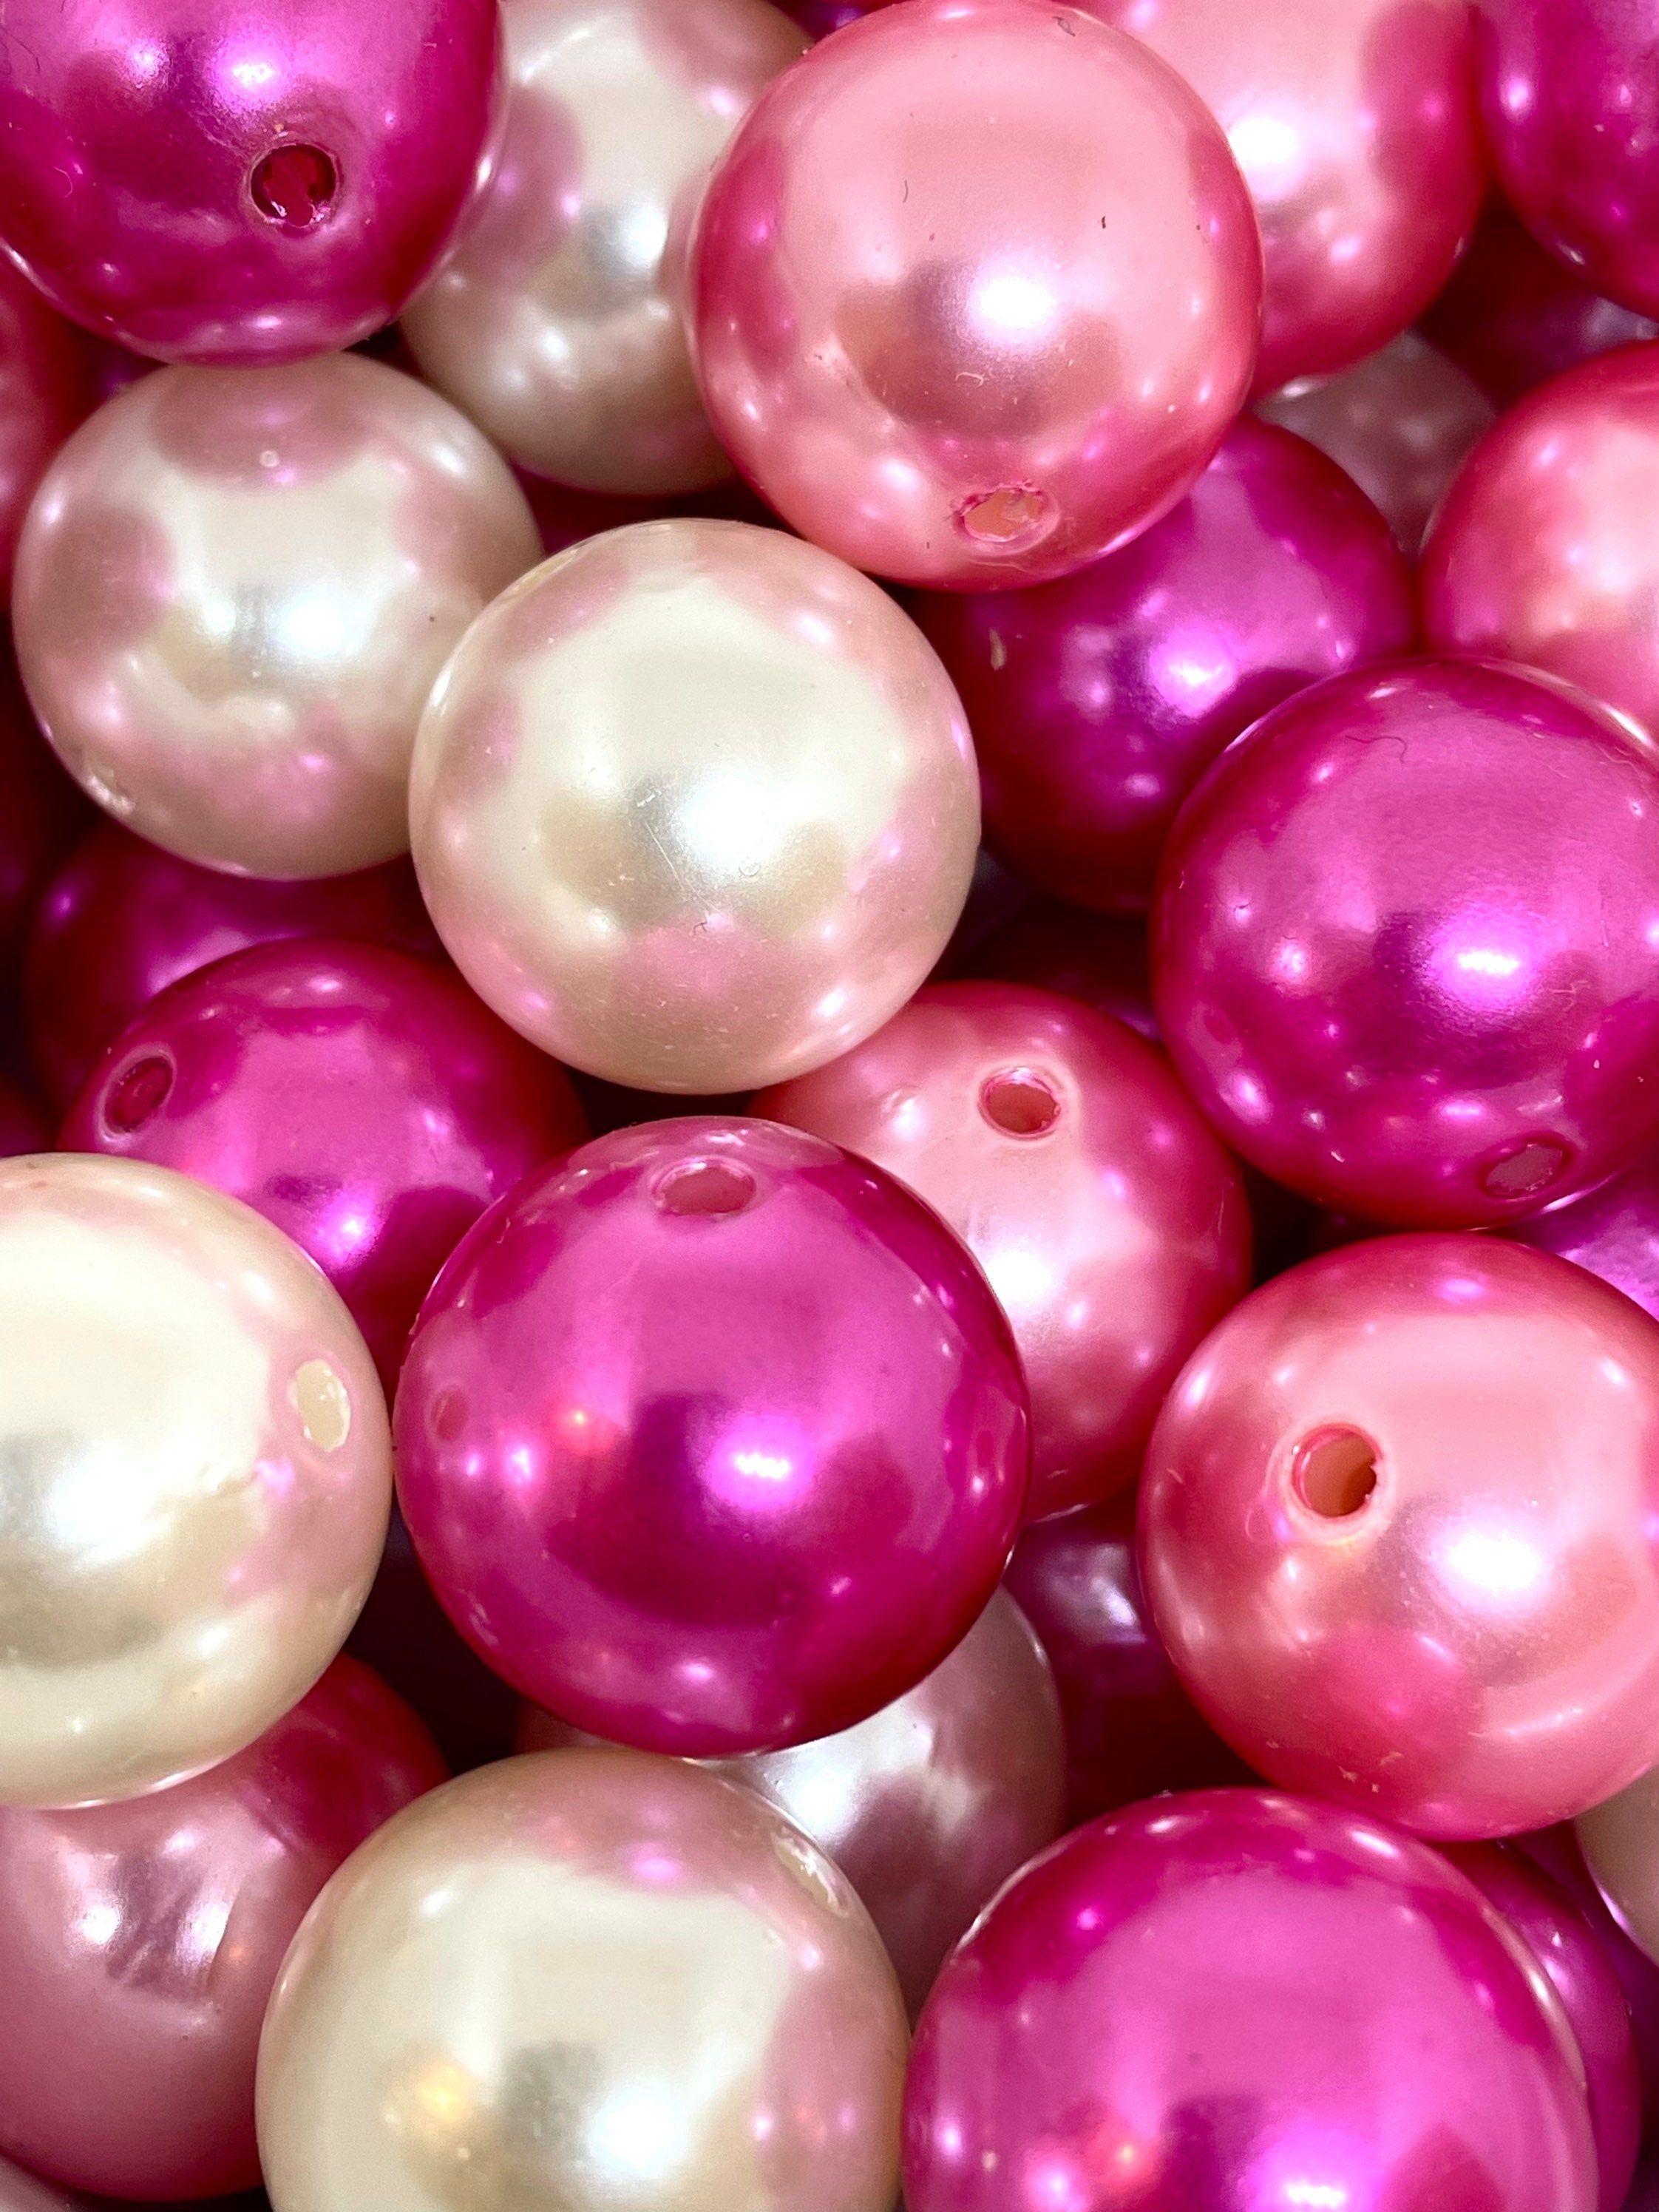 Chunky Beads Glamour Mix, 20mm Shiny Beads for Chunky Necklace, Bright Pink Pearl Beads for Jewelry Making